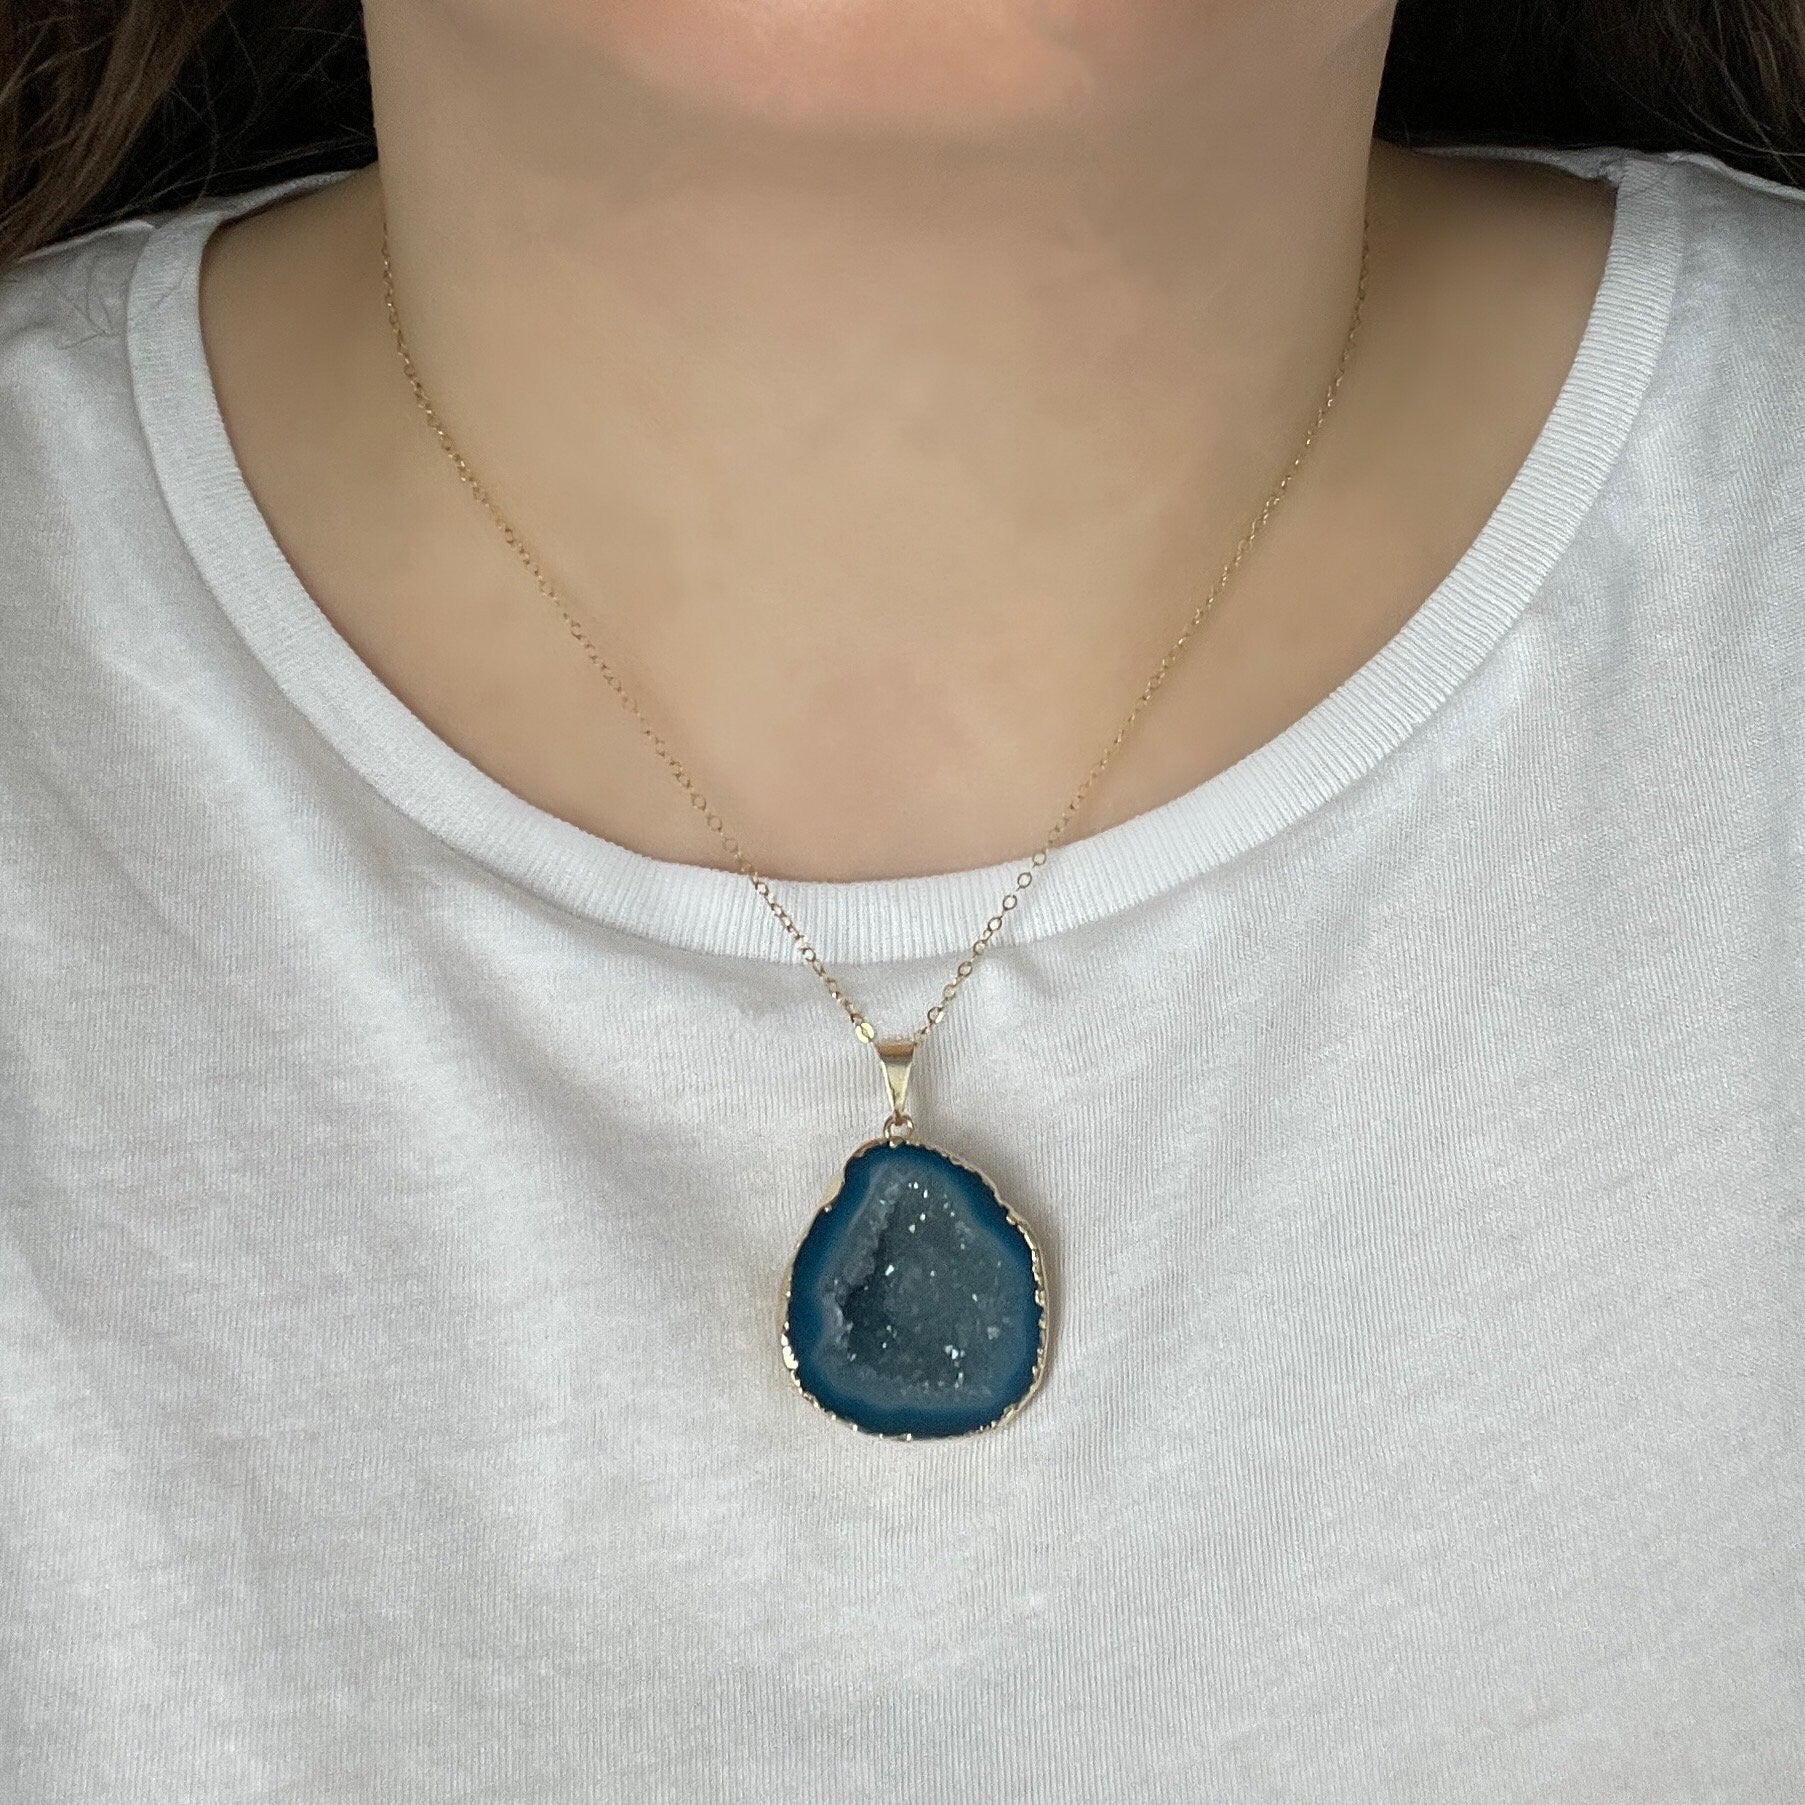 Turquoise Druzy Necklace, Small Geode Pendant, Crystal Pendant Gold Gemstone, Gift For Mom, G13-540